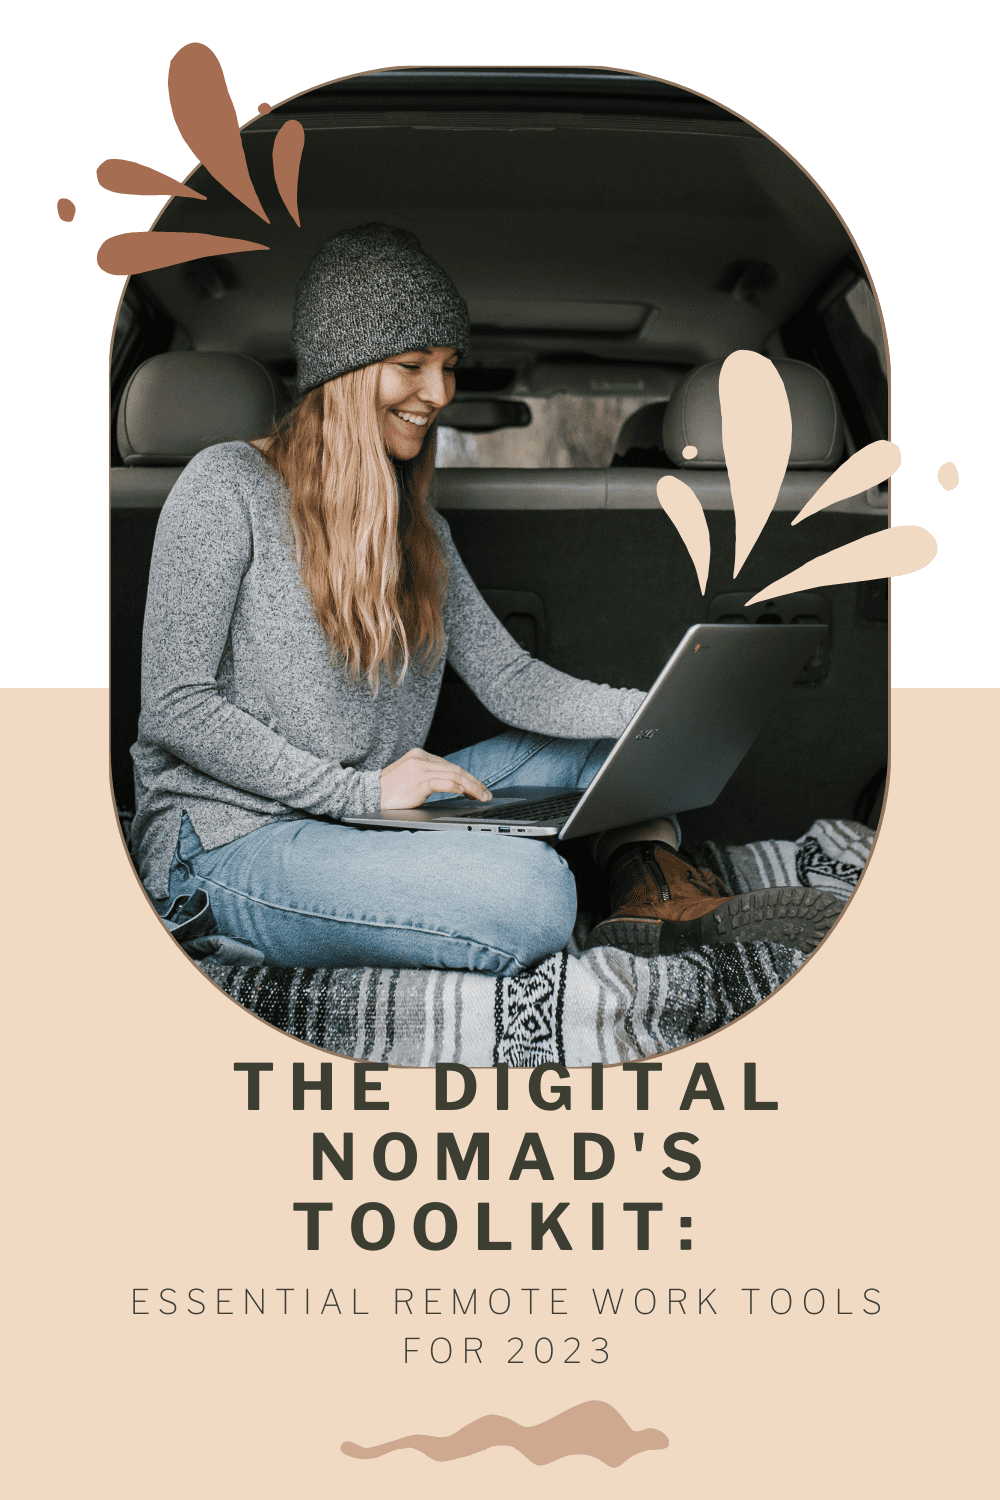 The Digital Nomad's Toolkit: Essential Remote Work Tools for 2023